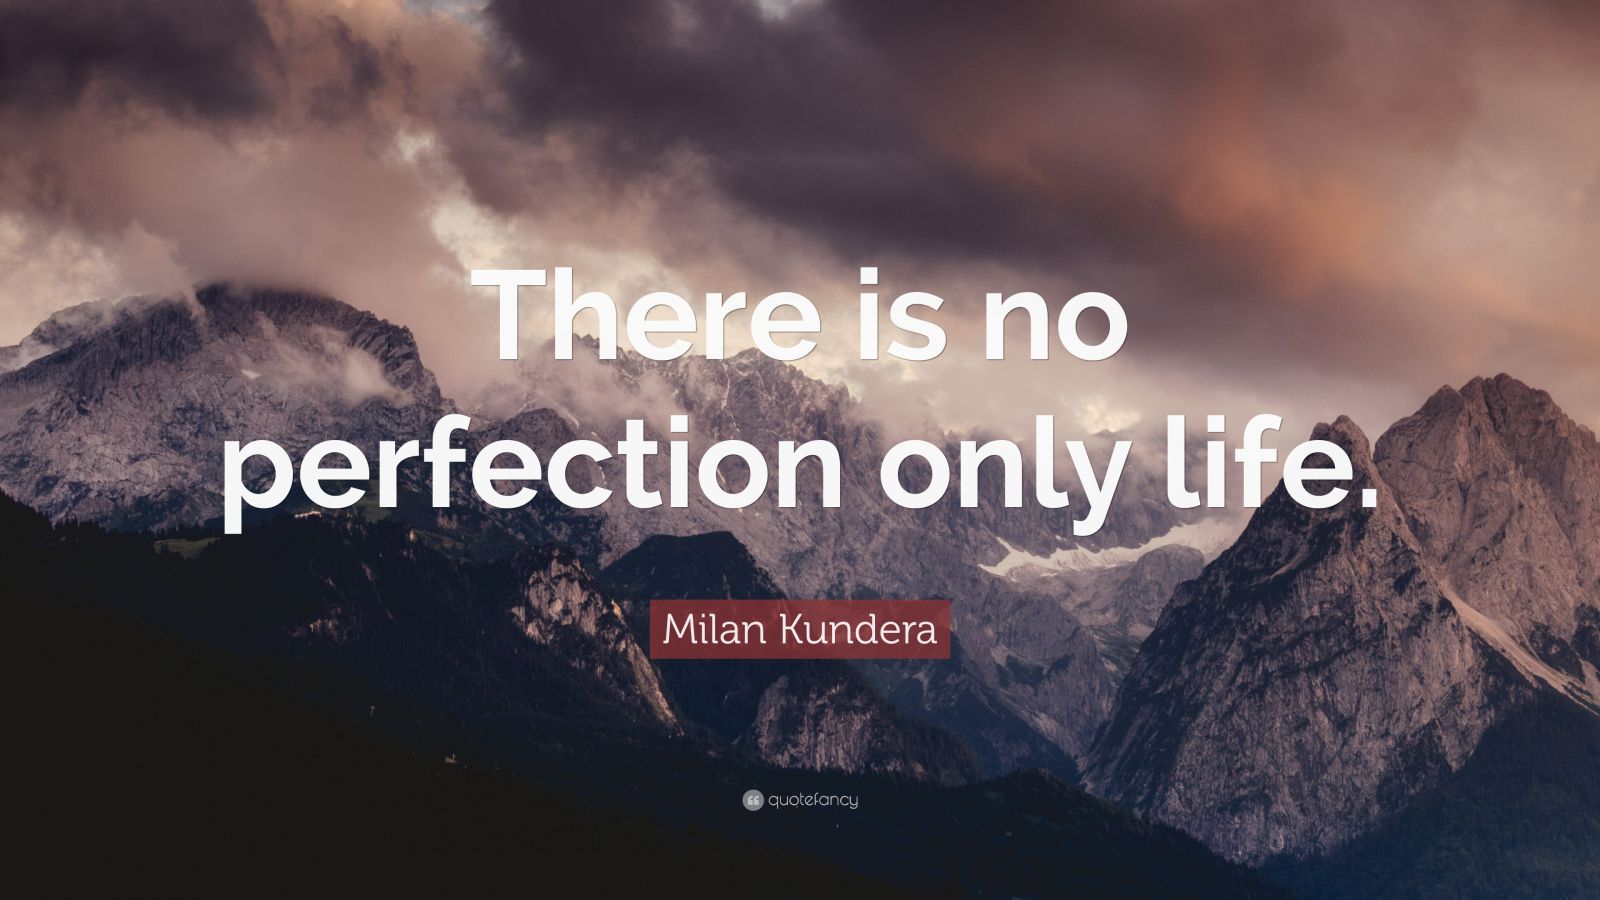 Milan Kundera Quote: “There is no perfection only life.” (12 wallpapers ...